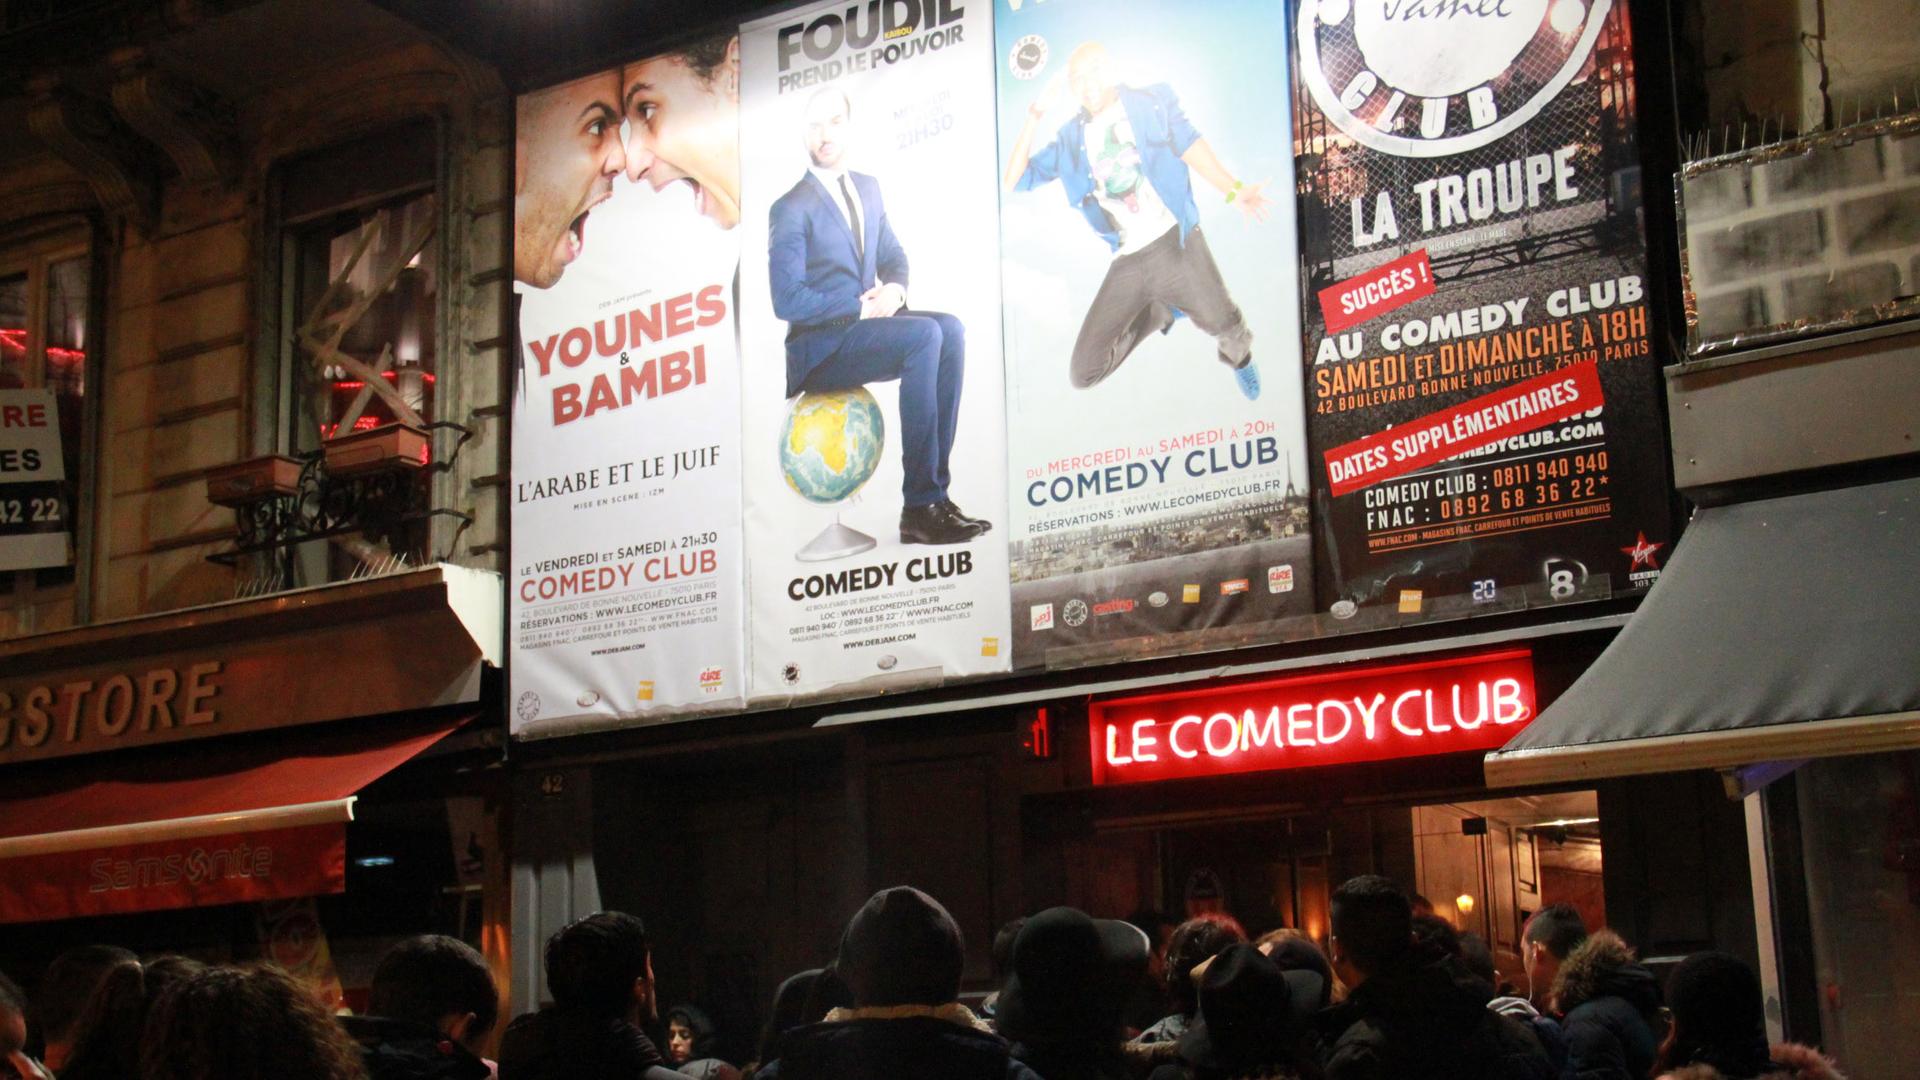 Outside Paris' Le Comedy Club before the performace of comedians Younes and Bambi, aka Younes Depardieuis and Samuel Djian. Younes is Muslim. Samuel is Jewish. 